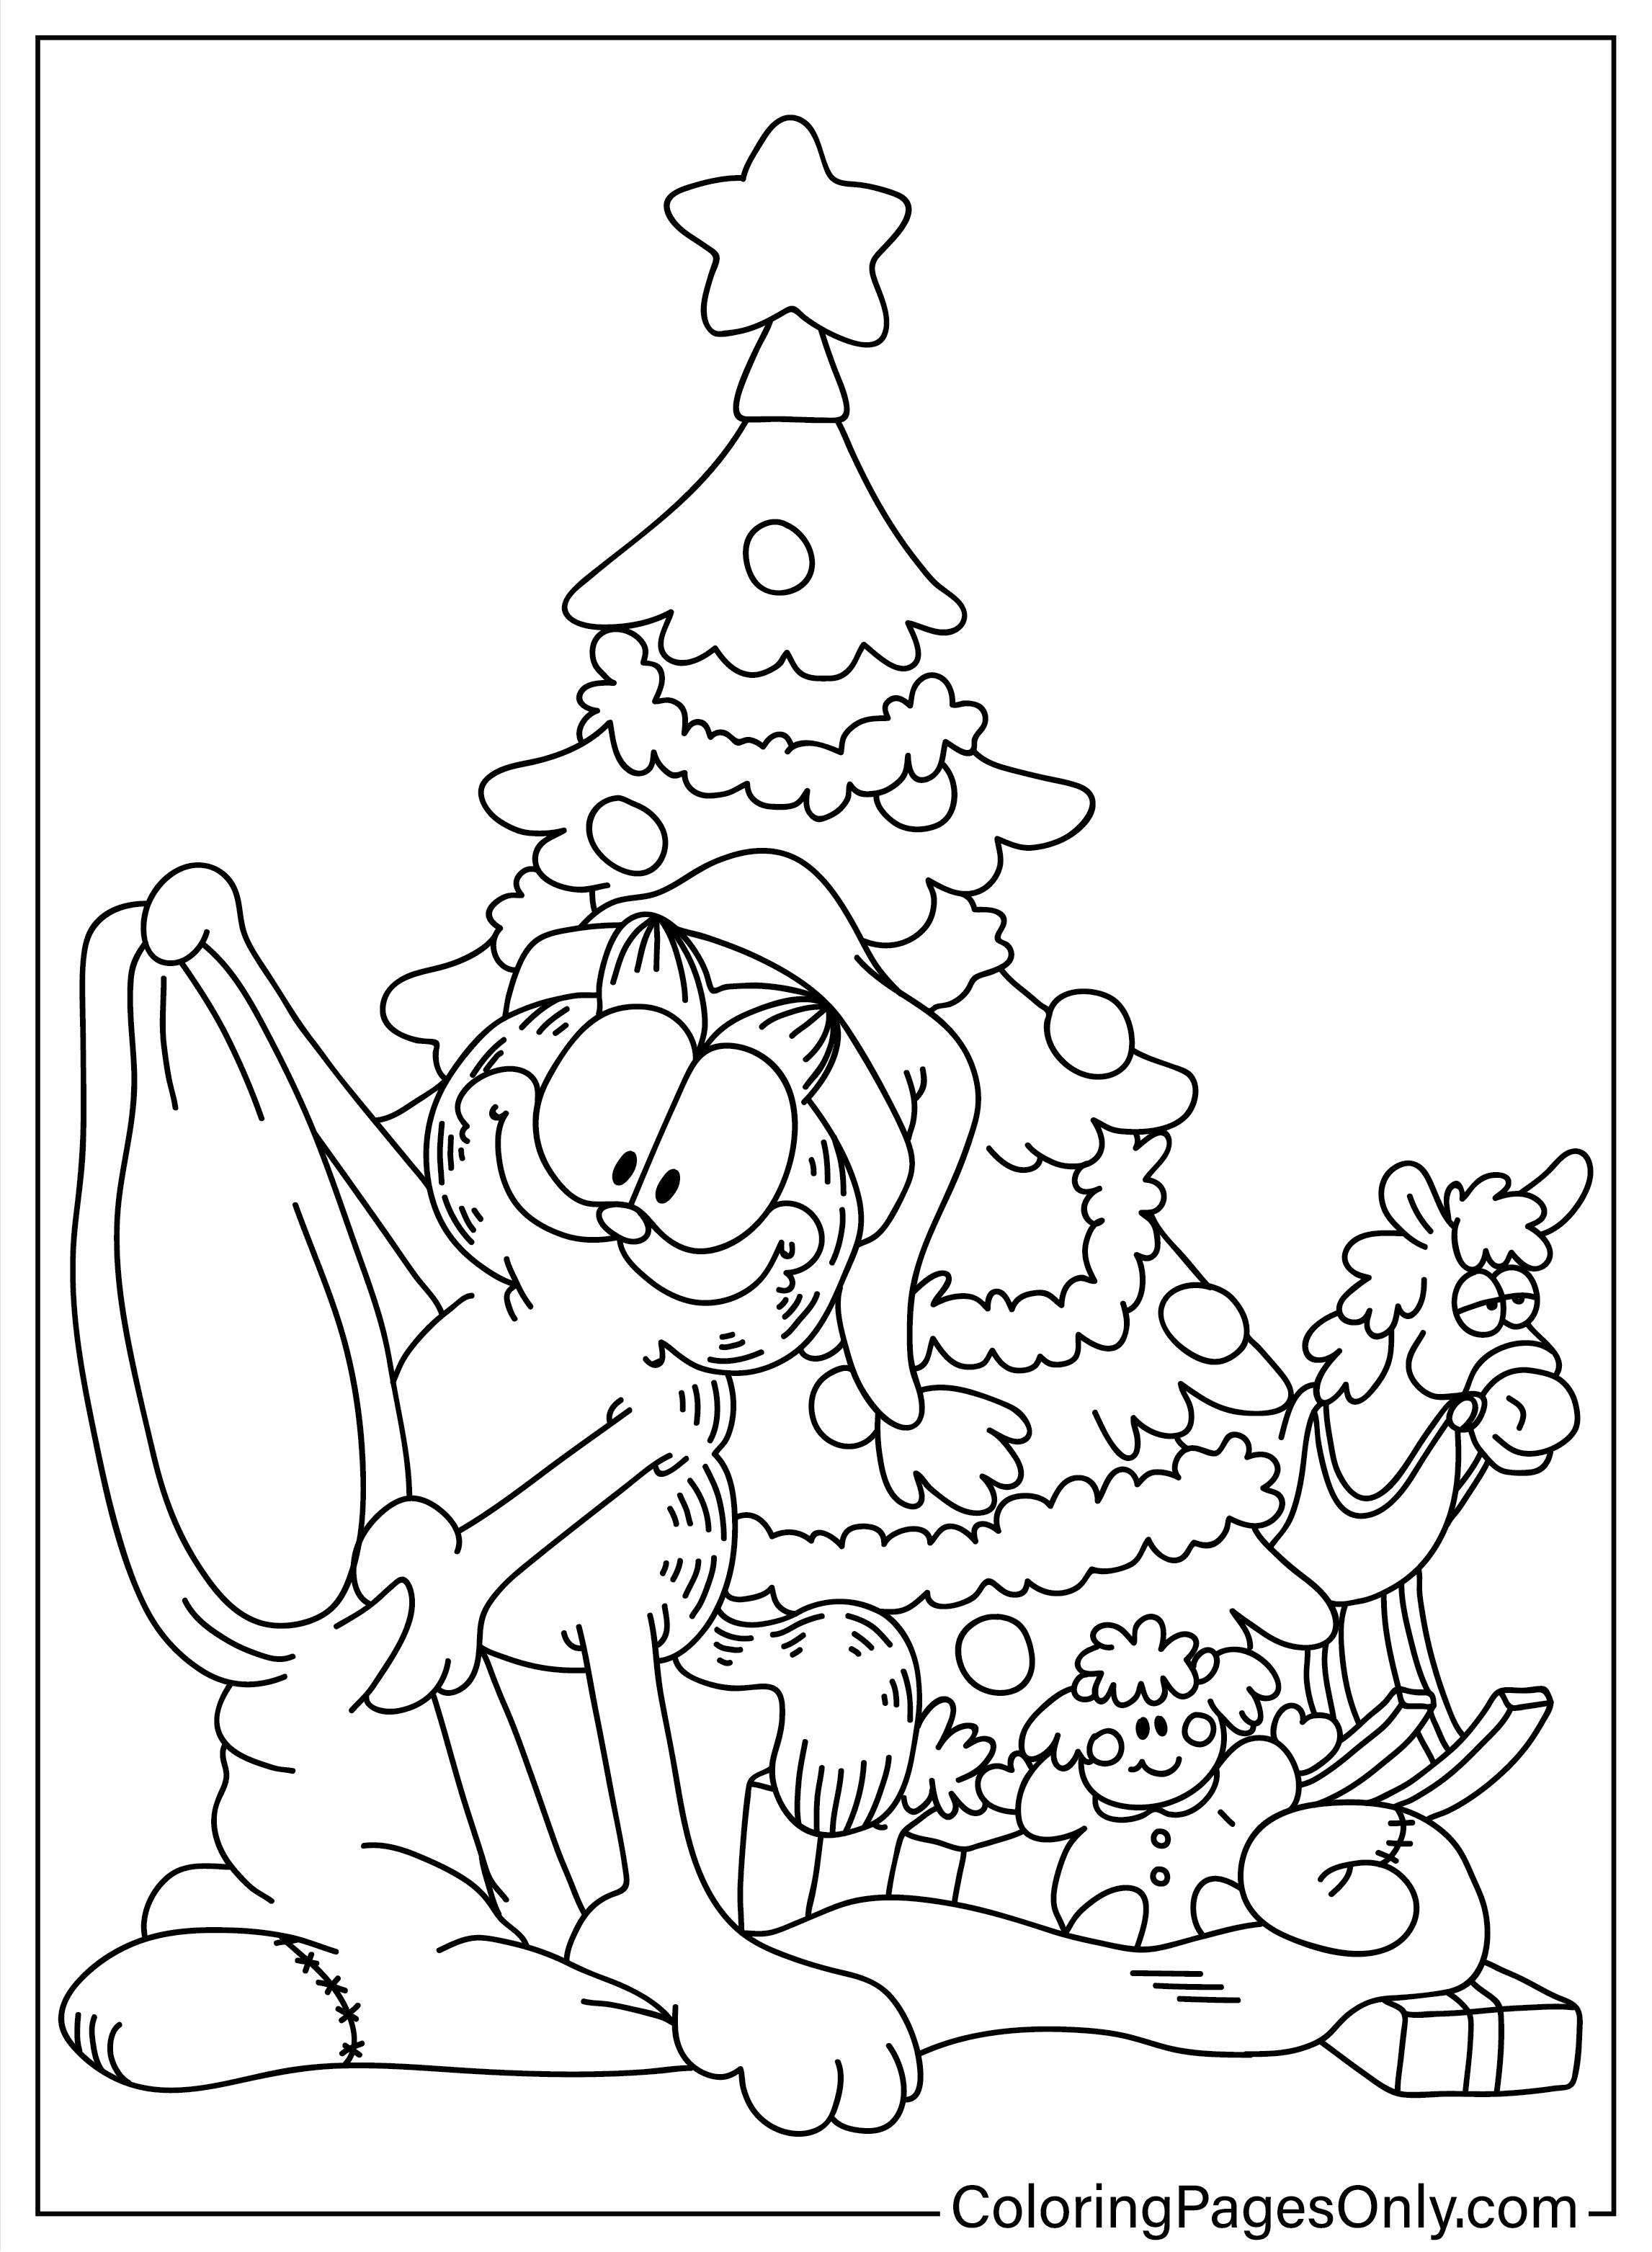 Christmas Garfield Coloring Page from Christmas Cartoon